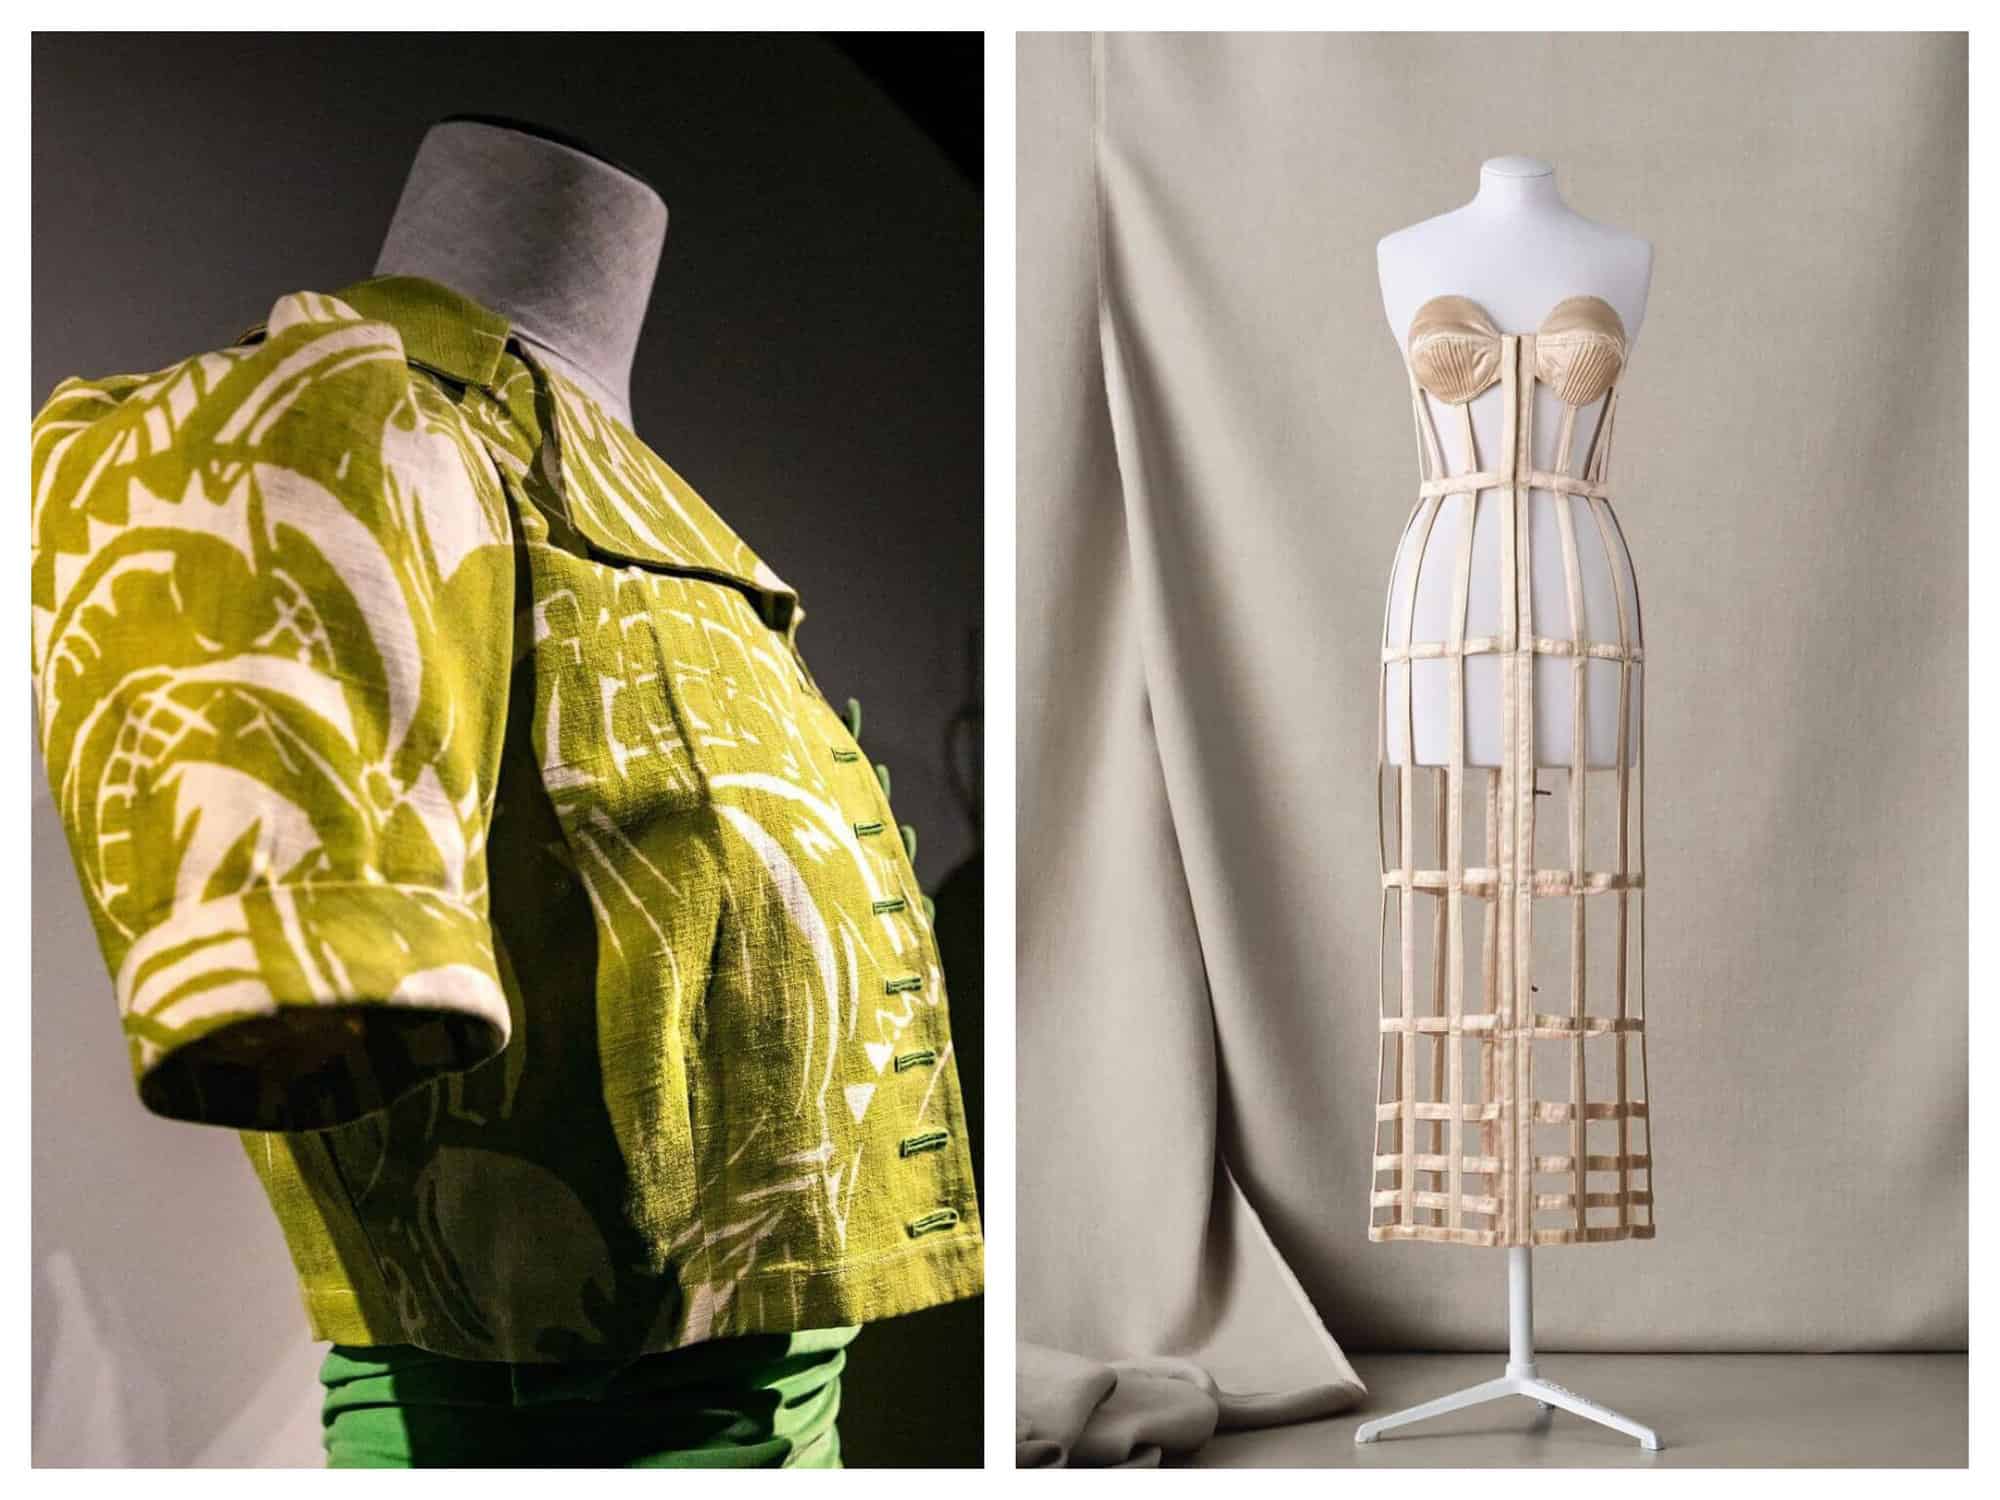 (Left) A green shirt with white details covers a mannequin. / (Right) A long cream colored corset decorates a white mannequin. 